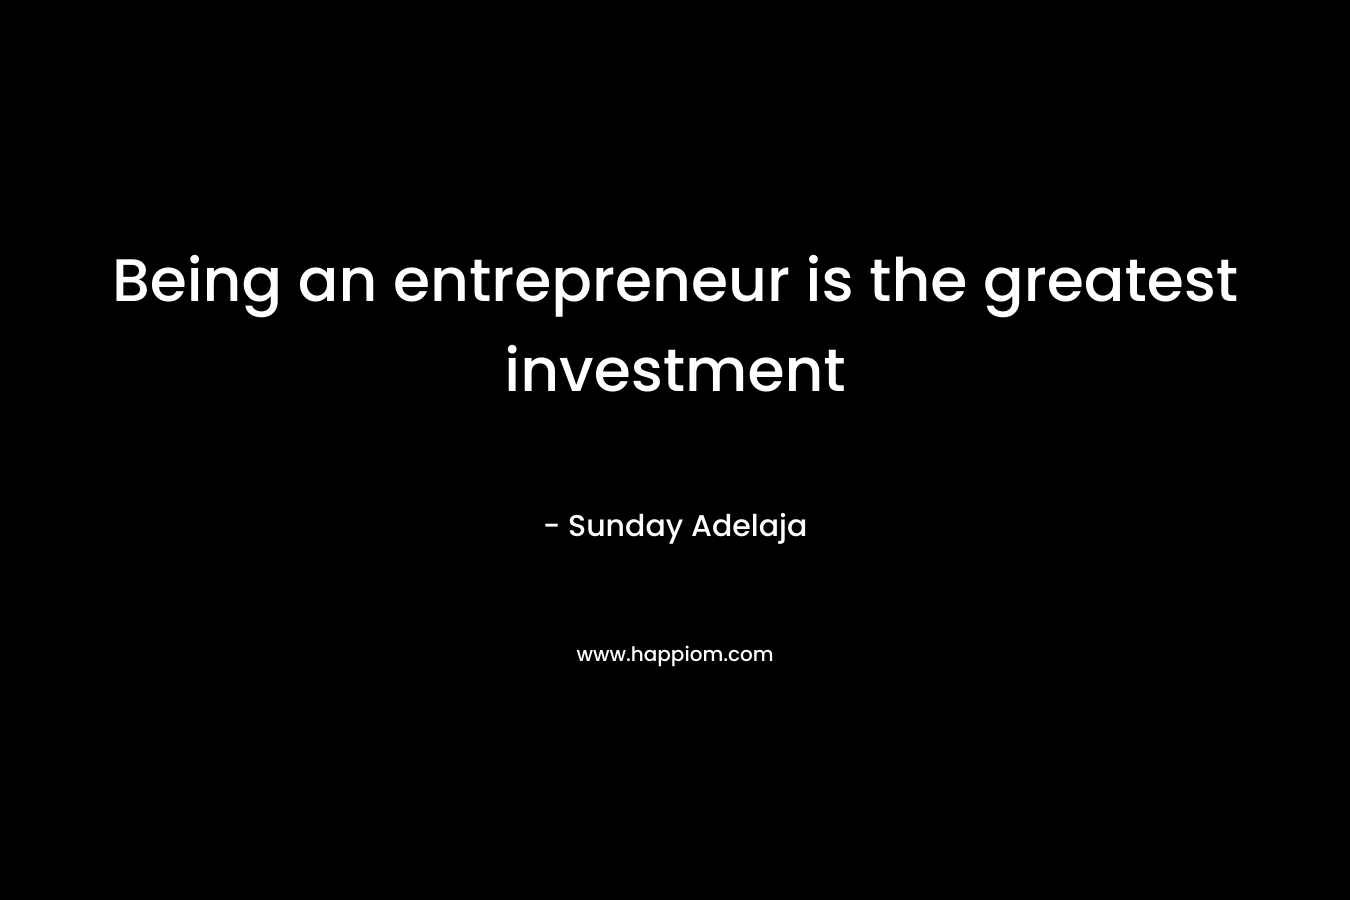 Being an entrepreneur is the greatest investment